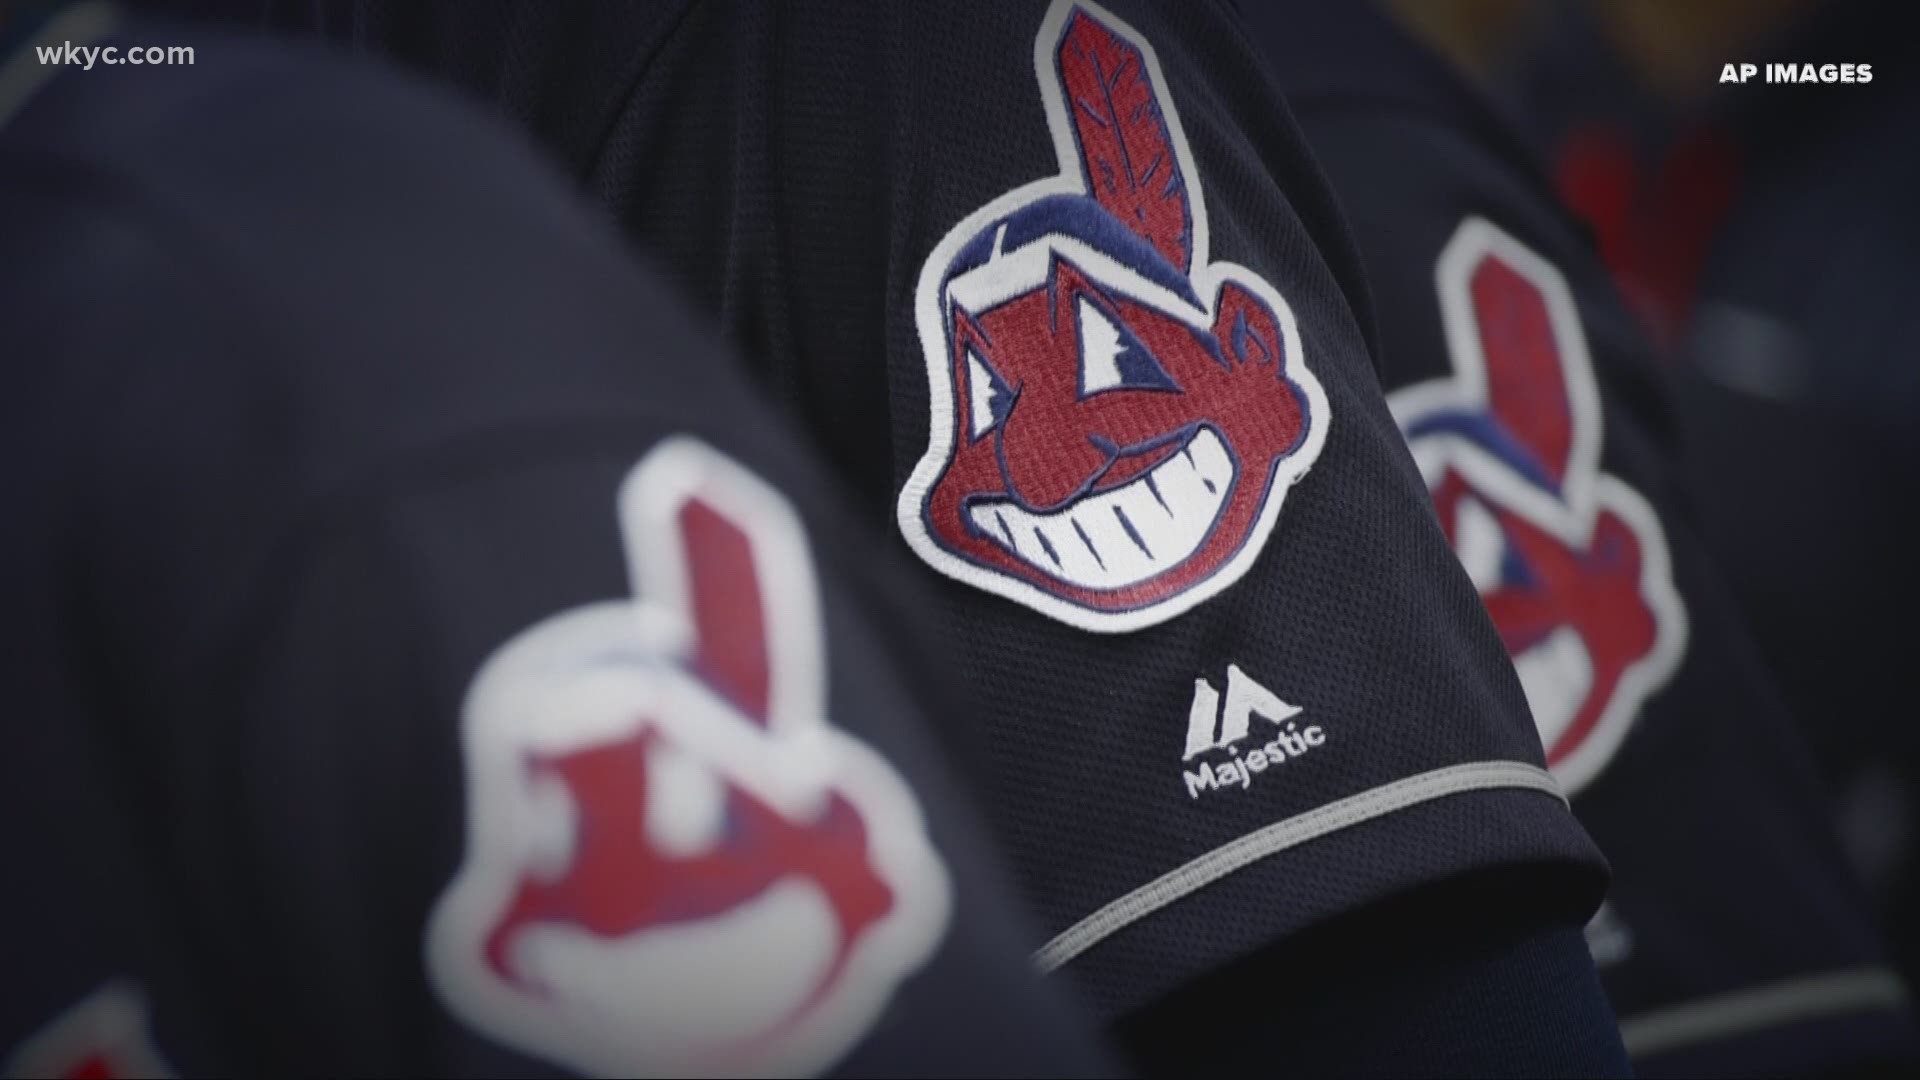 The team removed the logo from the uniforms in 2019, but continues to sell merchandise with the image on it.